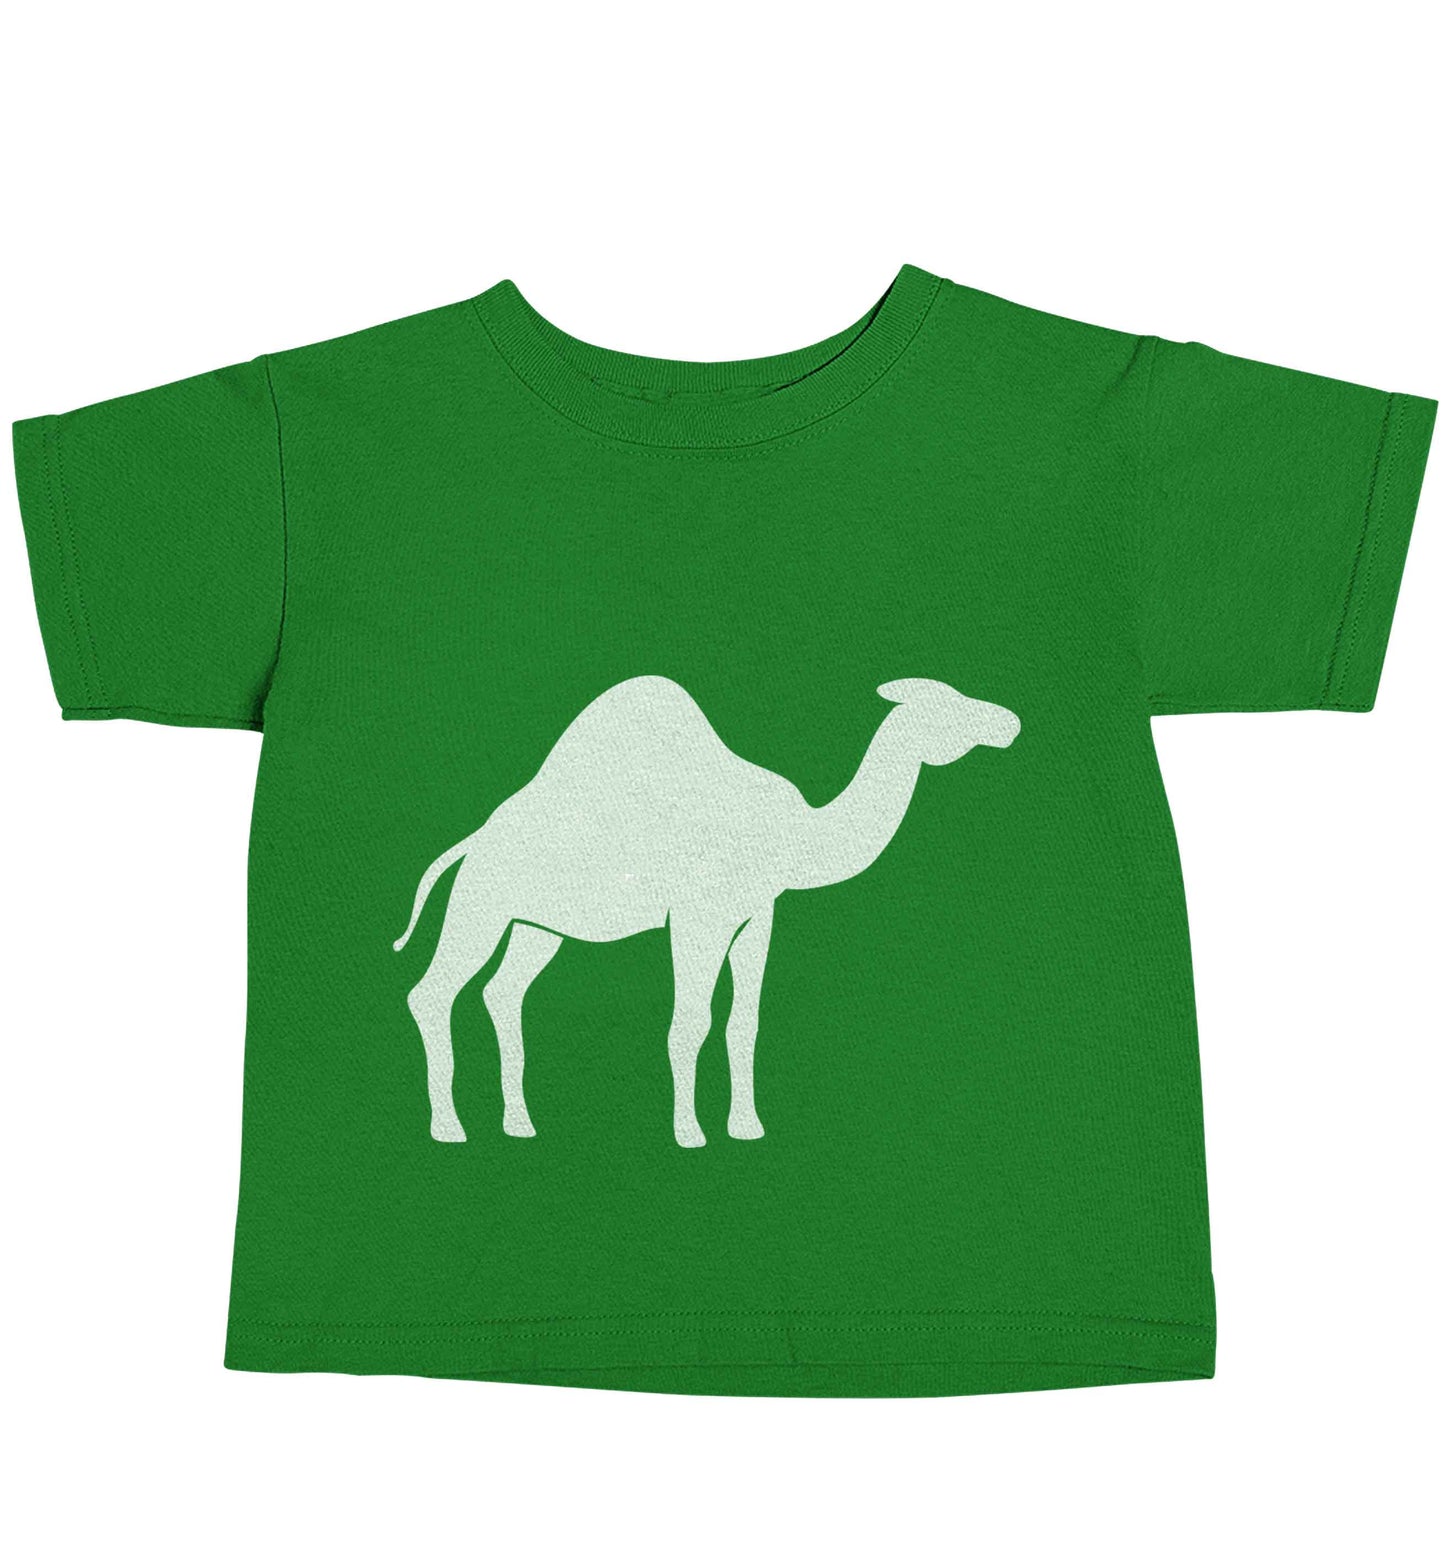 Blue camel green baby toddler Tshirt 2 Years